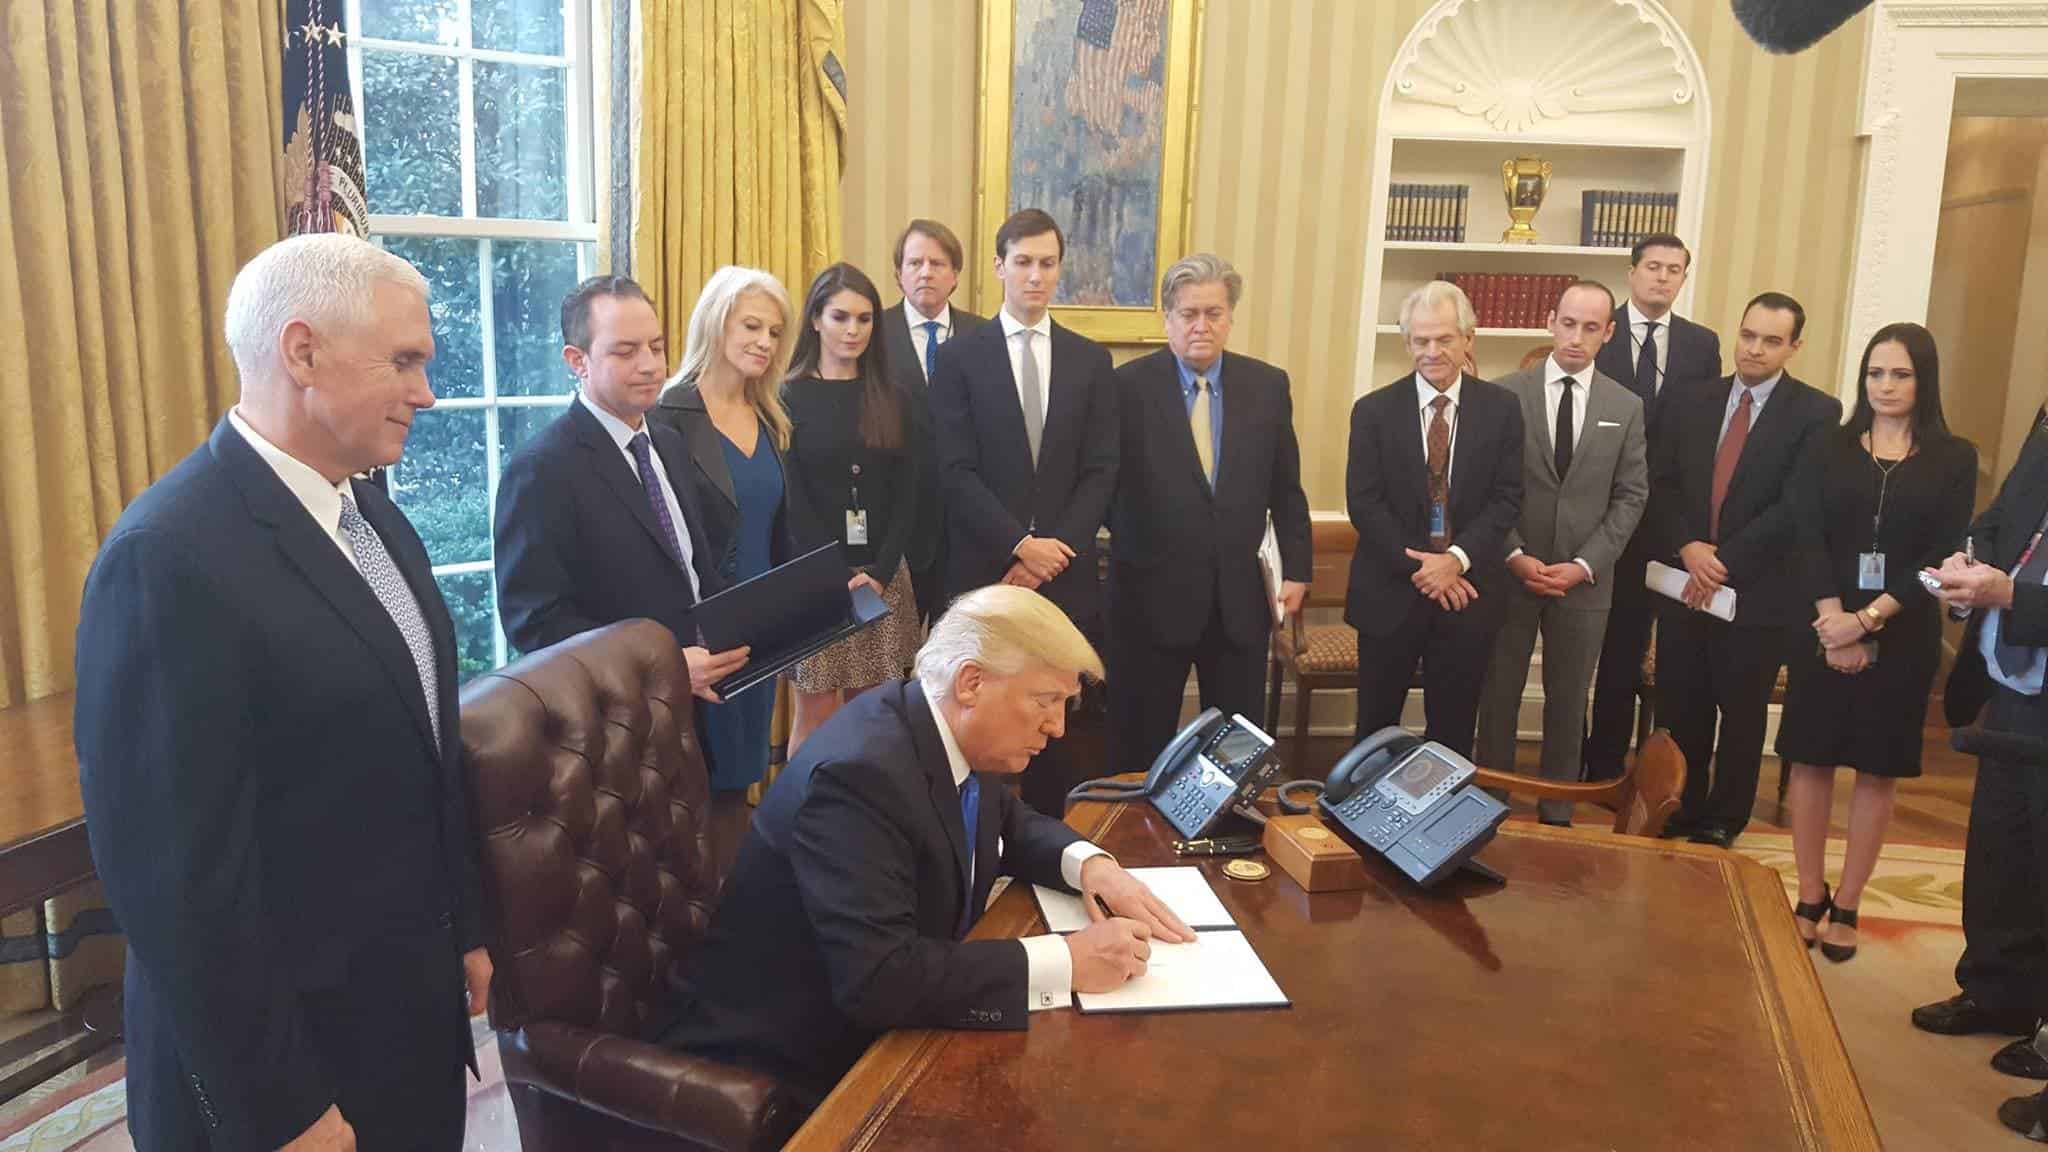 Donald Trump signs Executive Orders in January 2017. Credit: Wikimedia Commons.